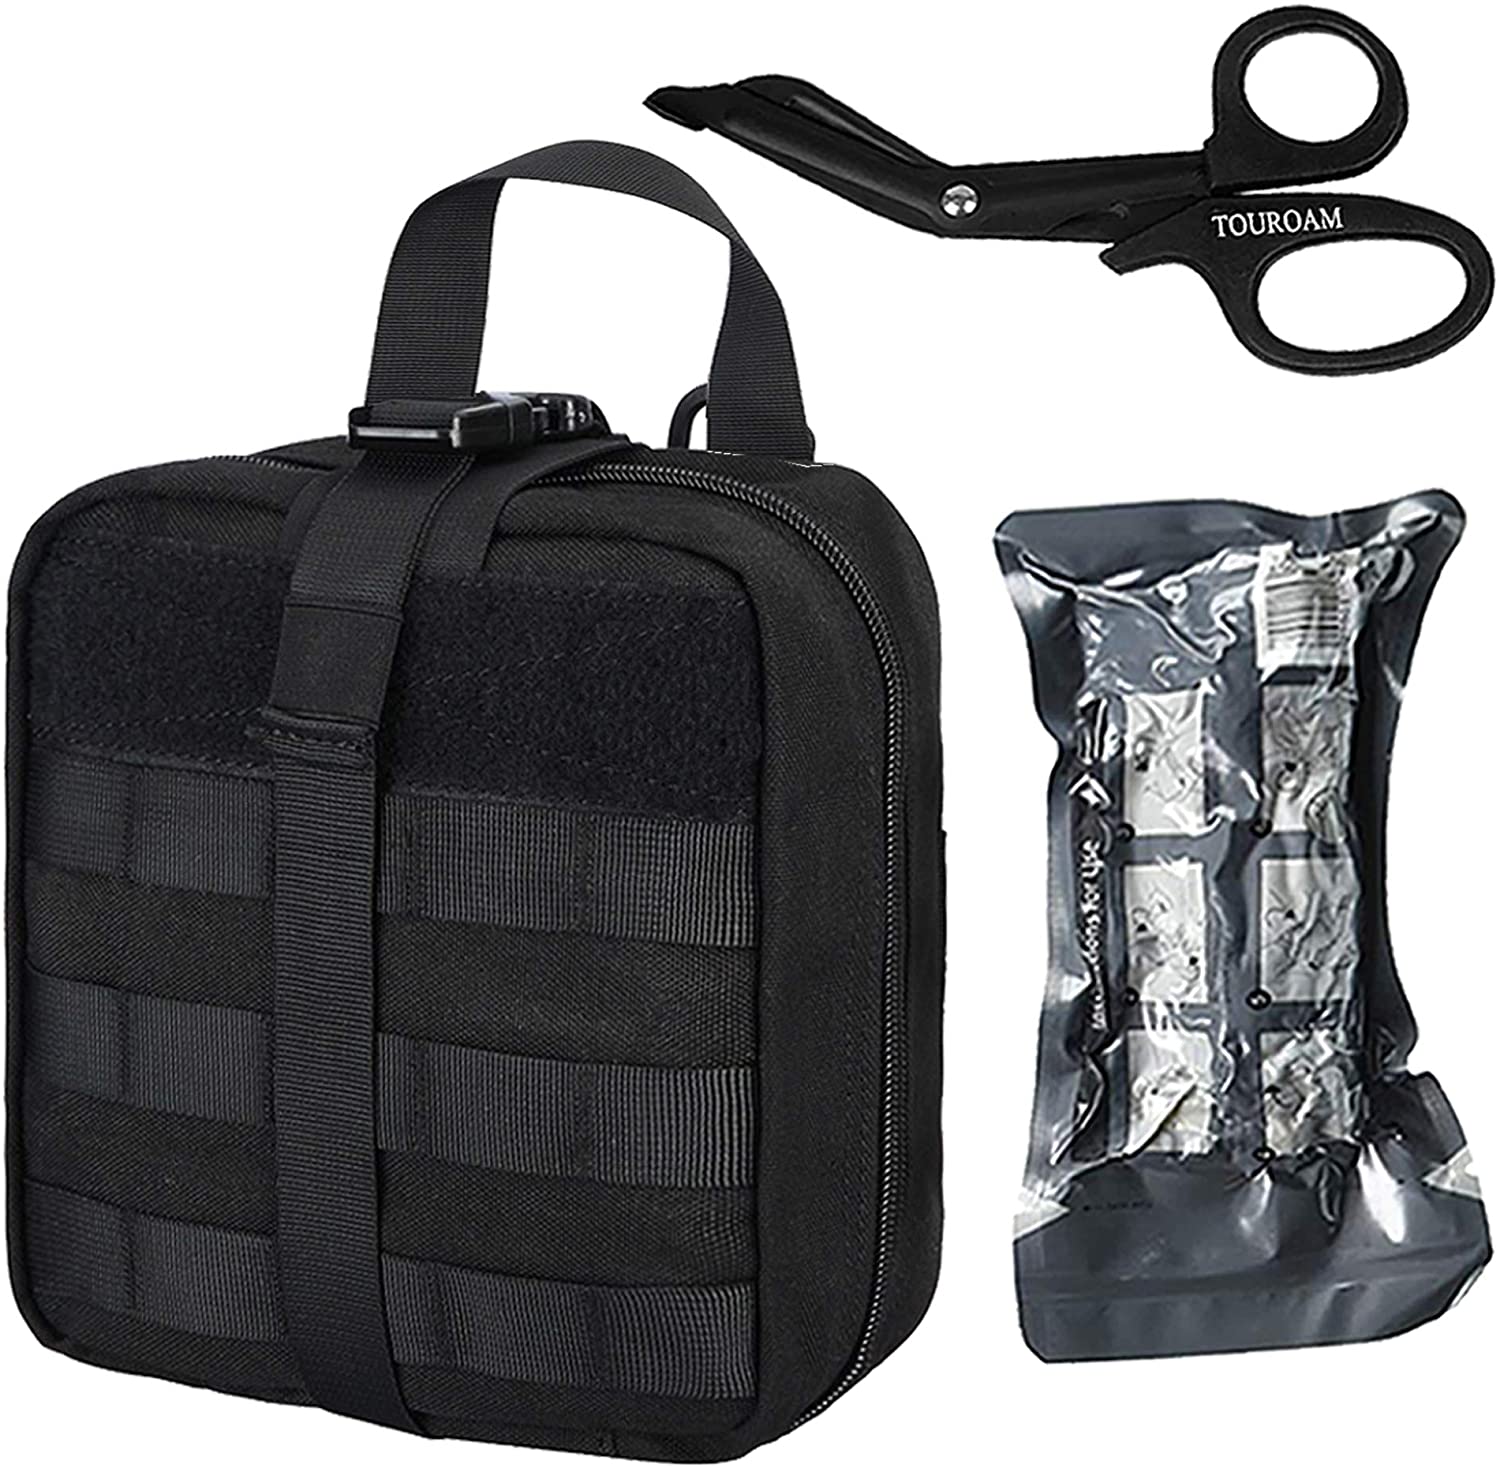 Survival Emergency Nylon Camping Hiking Heavy-Duty Tactical